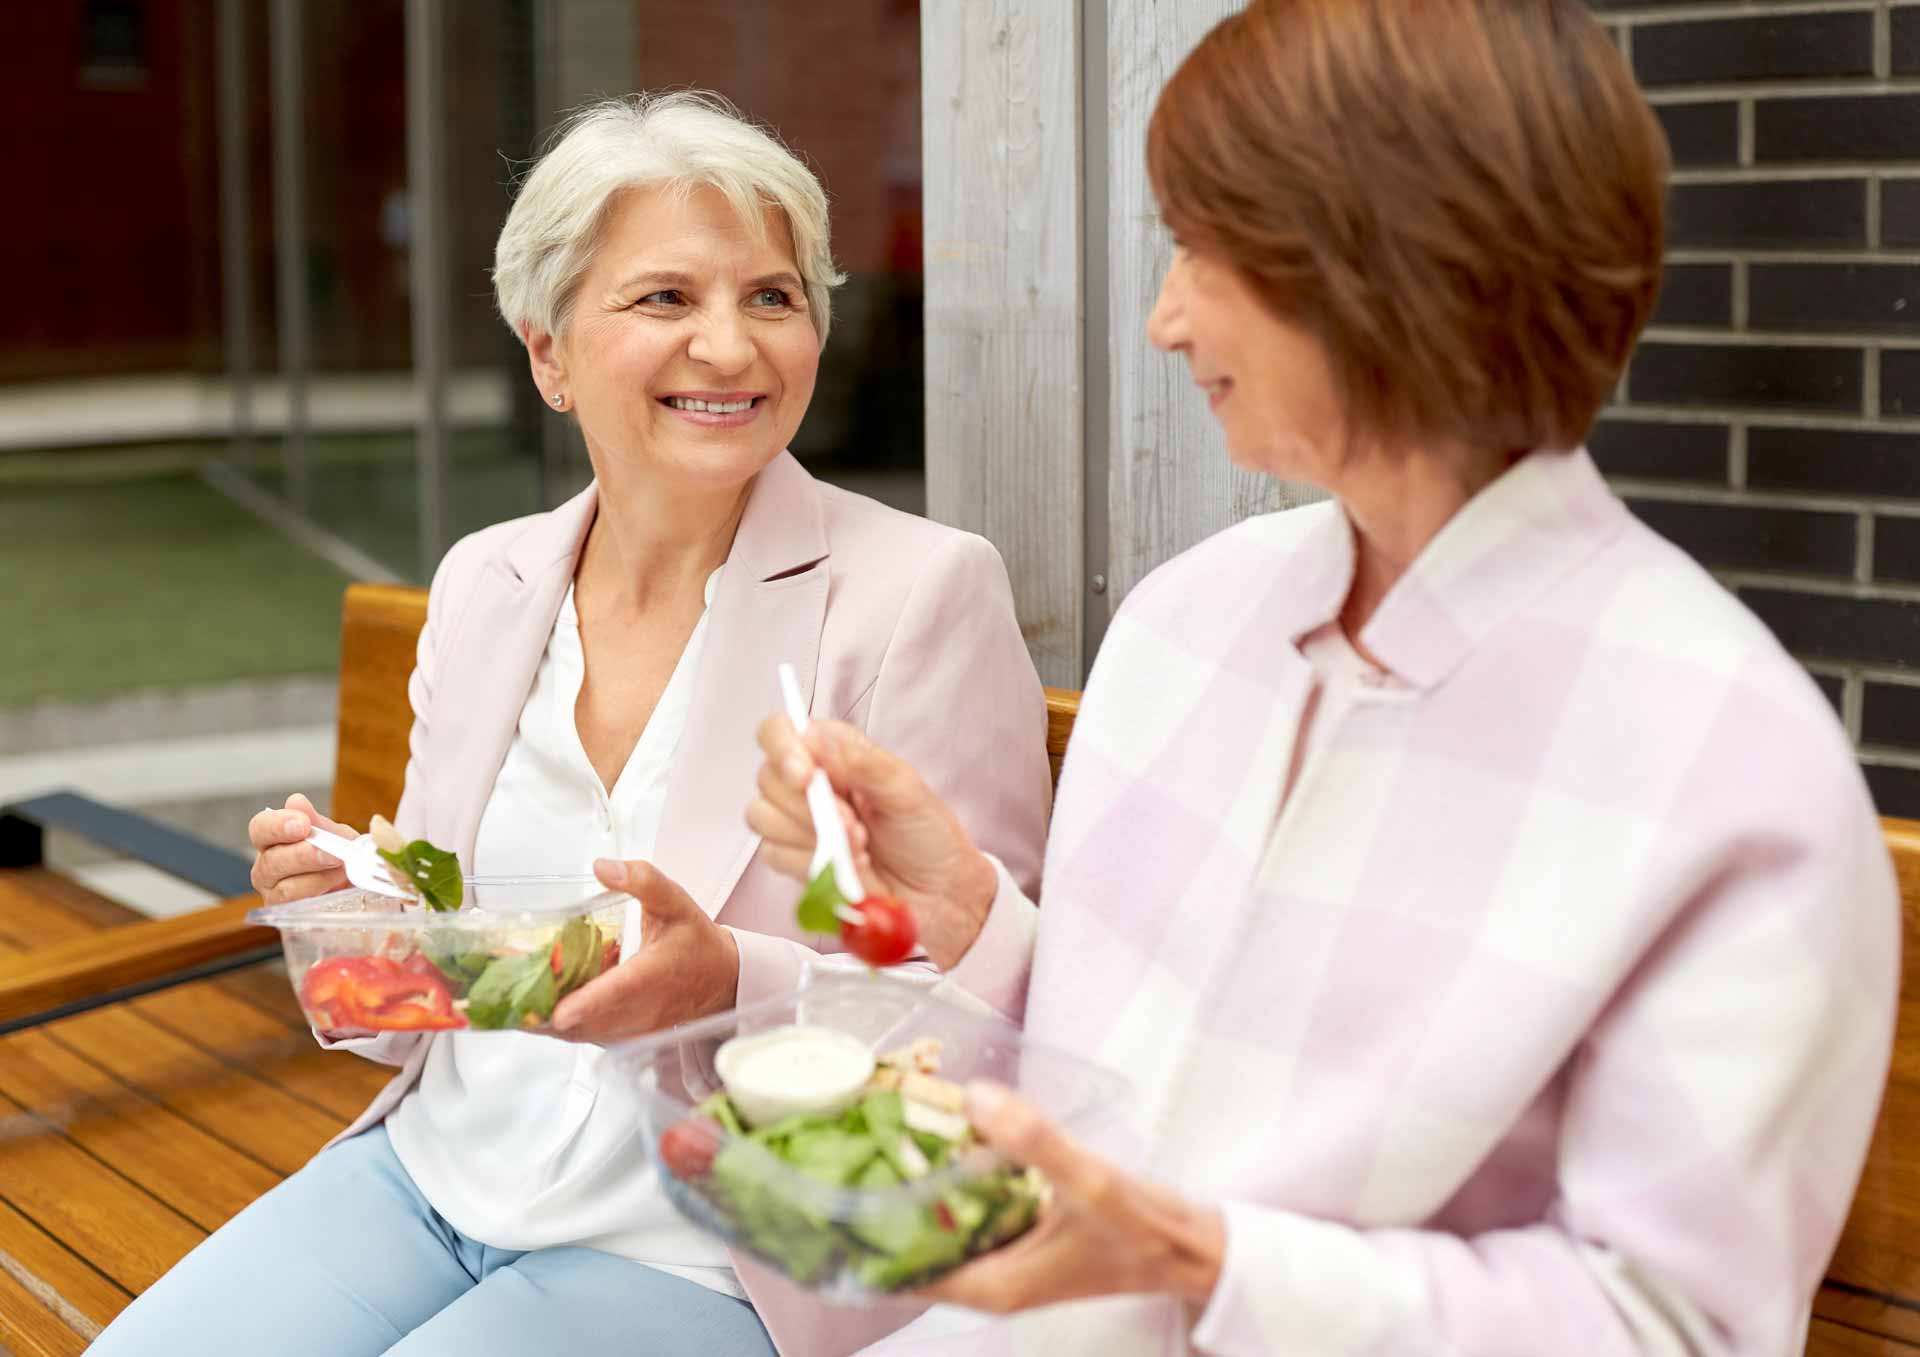 Two older white women sit on a bench outside eating salads from clear takeaway containers.